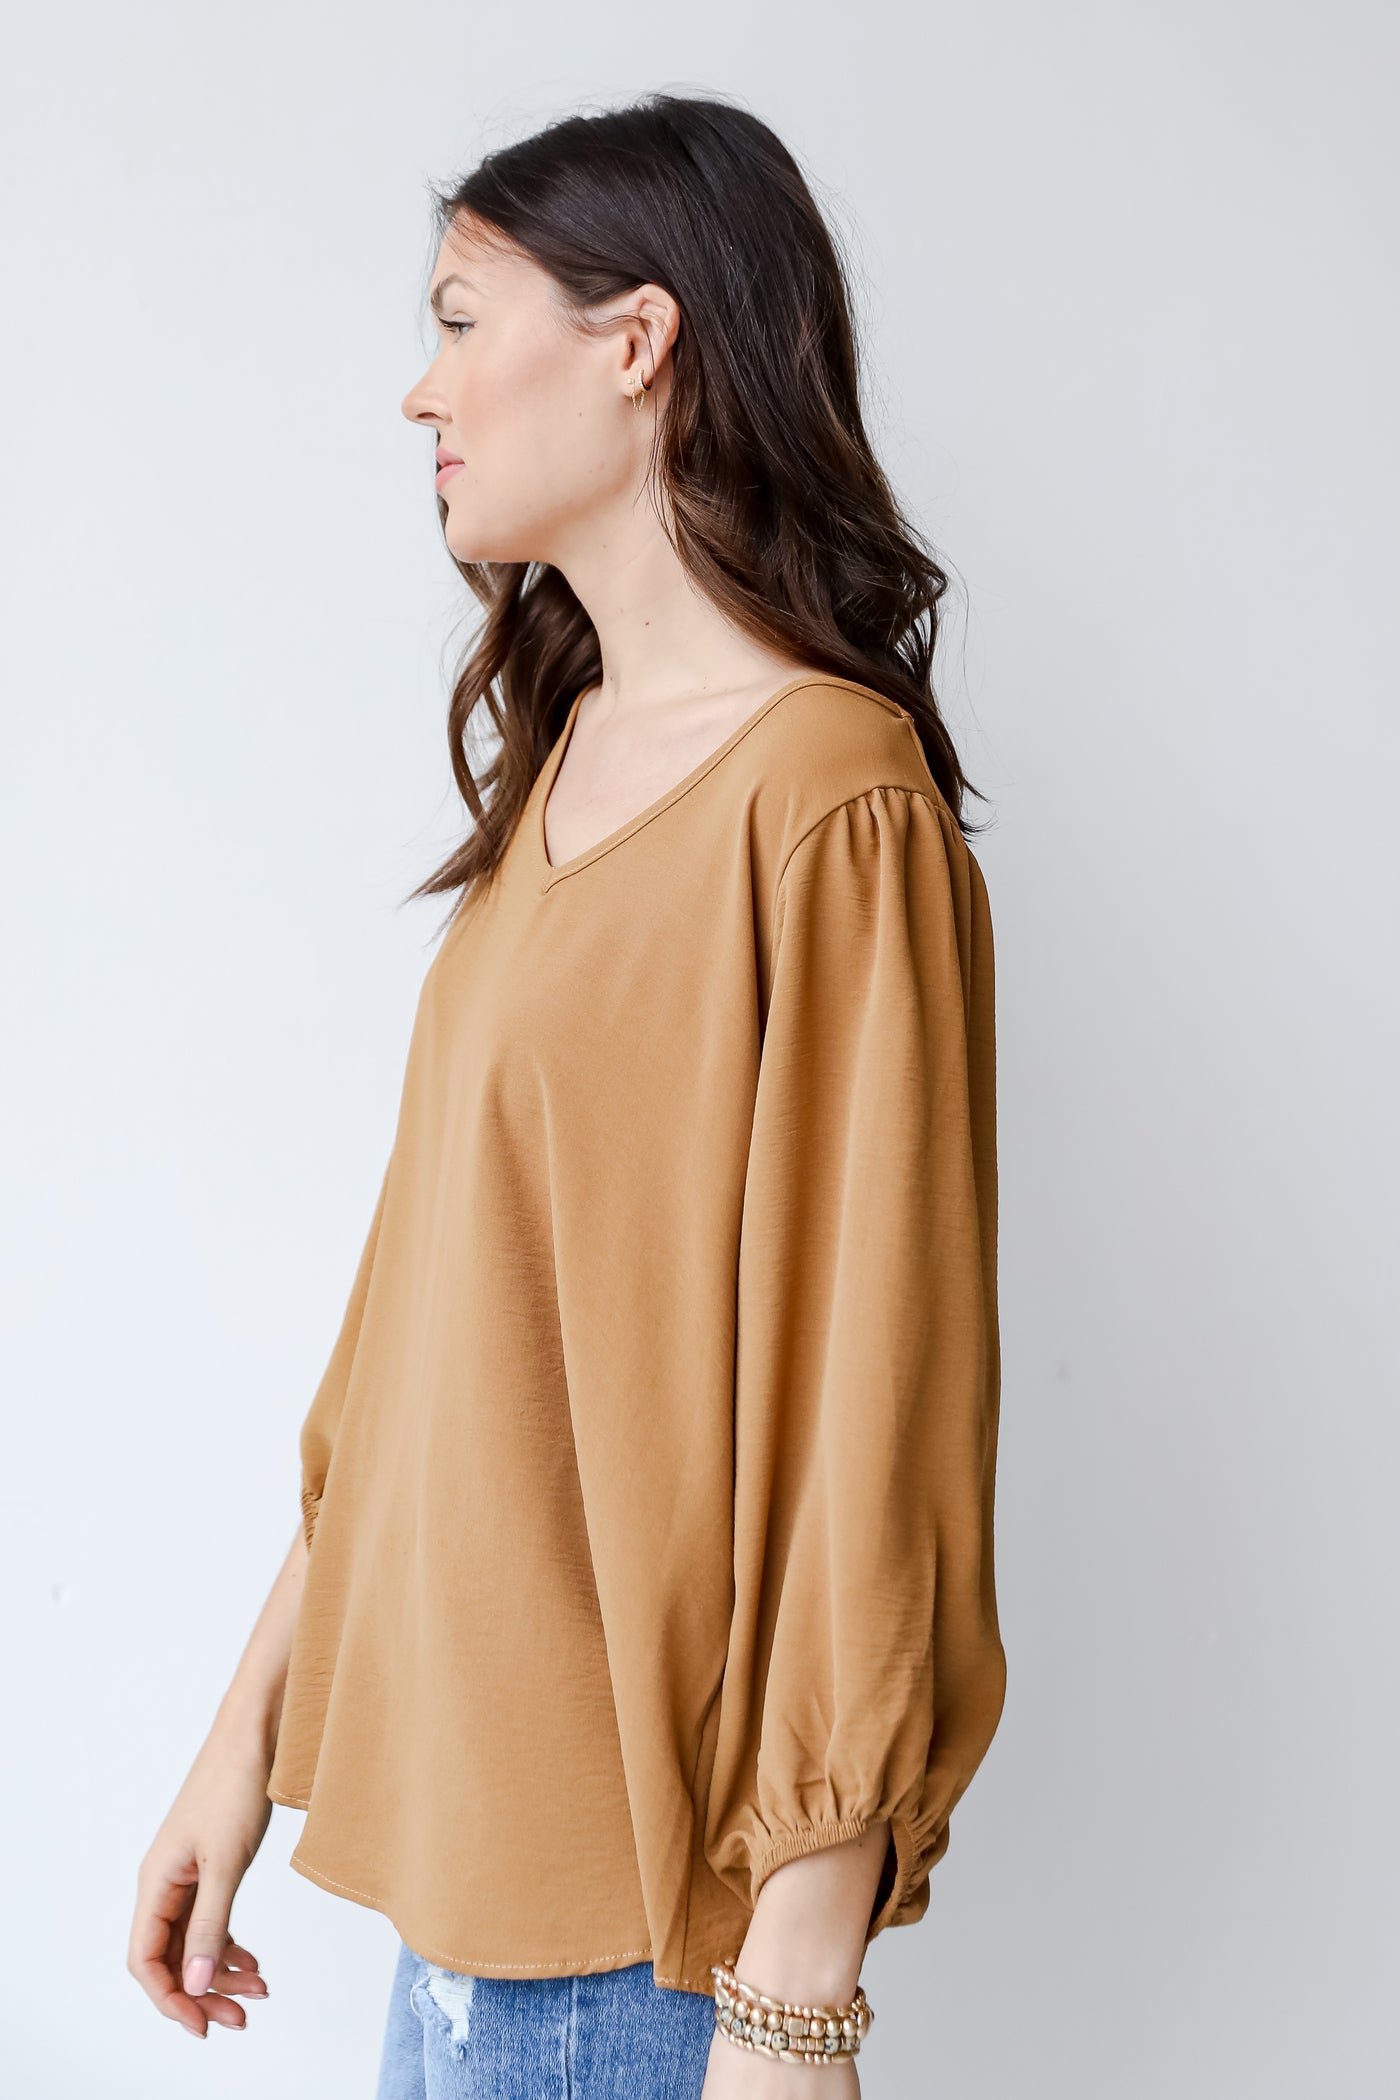 Blouse in camel side view